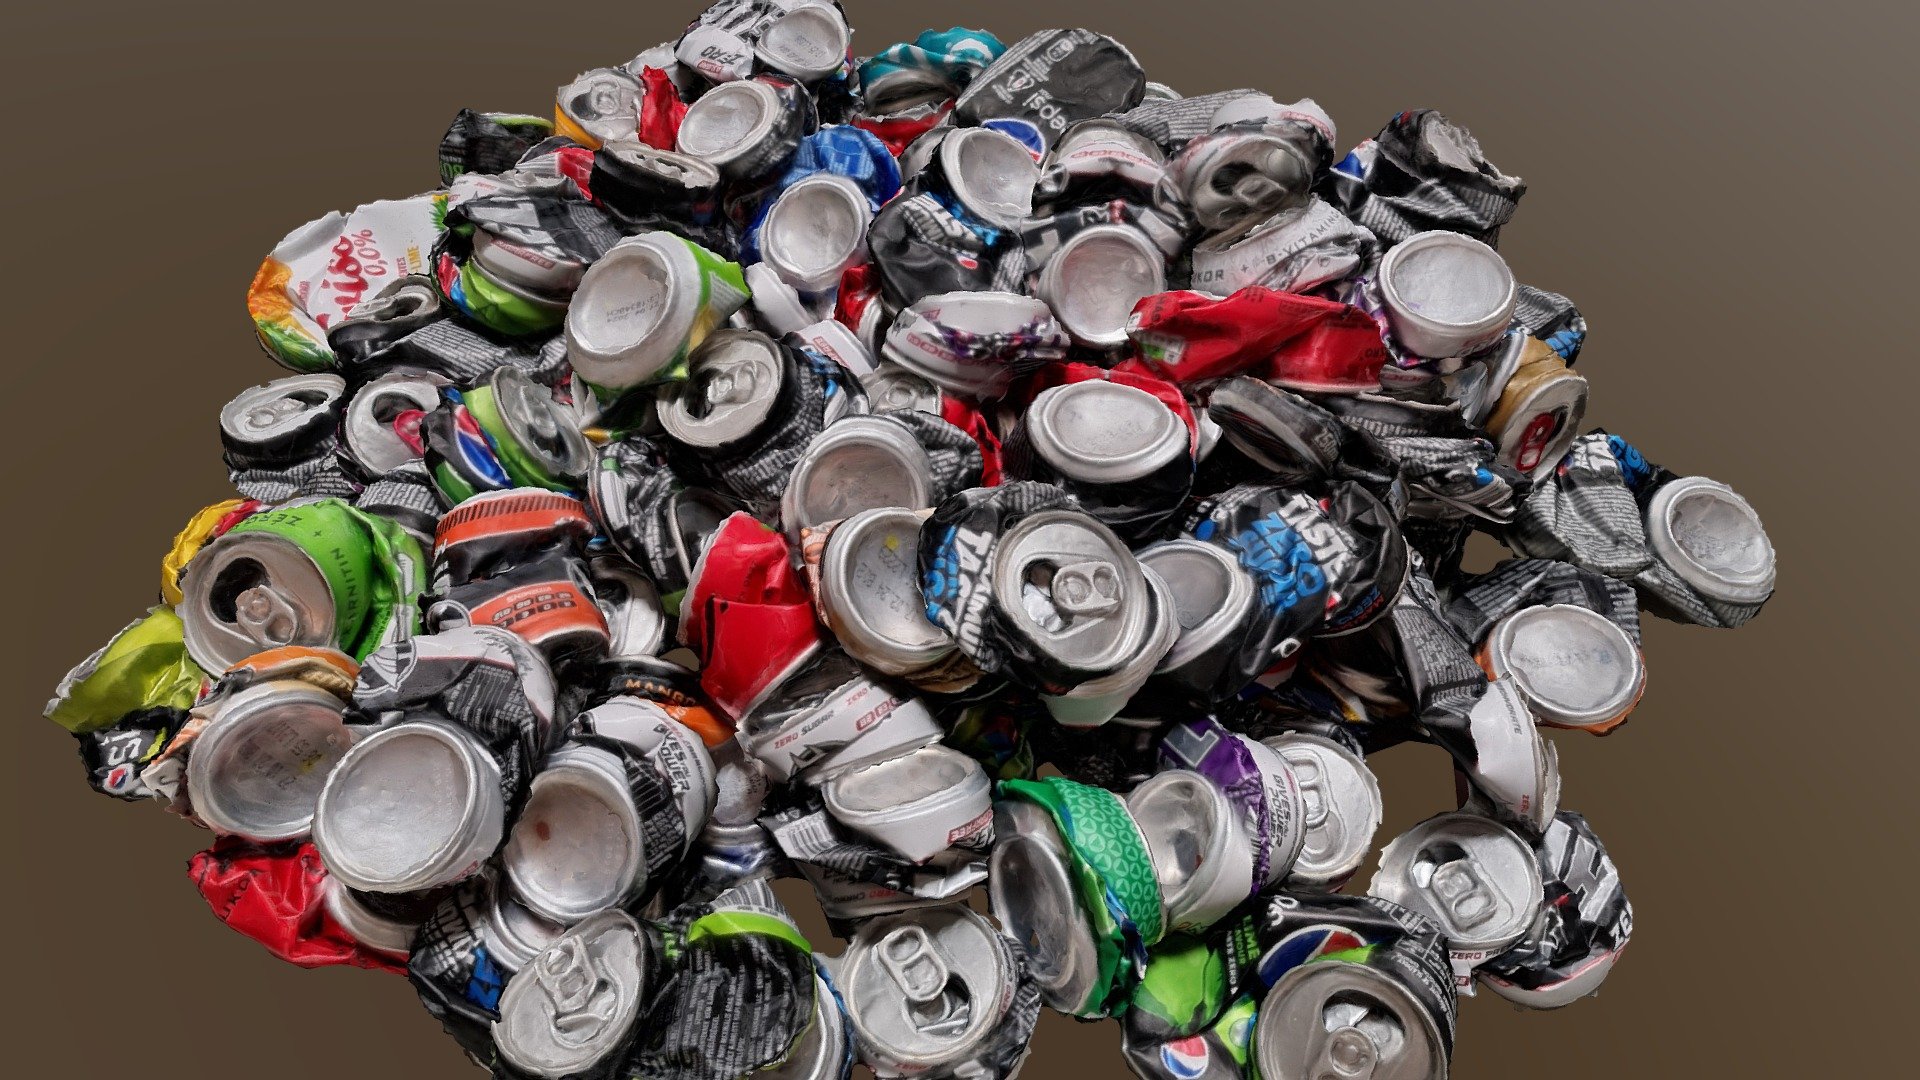 It's a big pile of aluminium soda cans that I take to be recycled. 
This quantity was collected over several months at my workplace.
Due to the quantity of soda cans, the quality of the scanning was medium 3d model